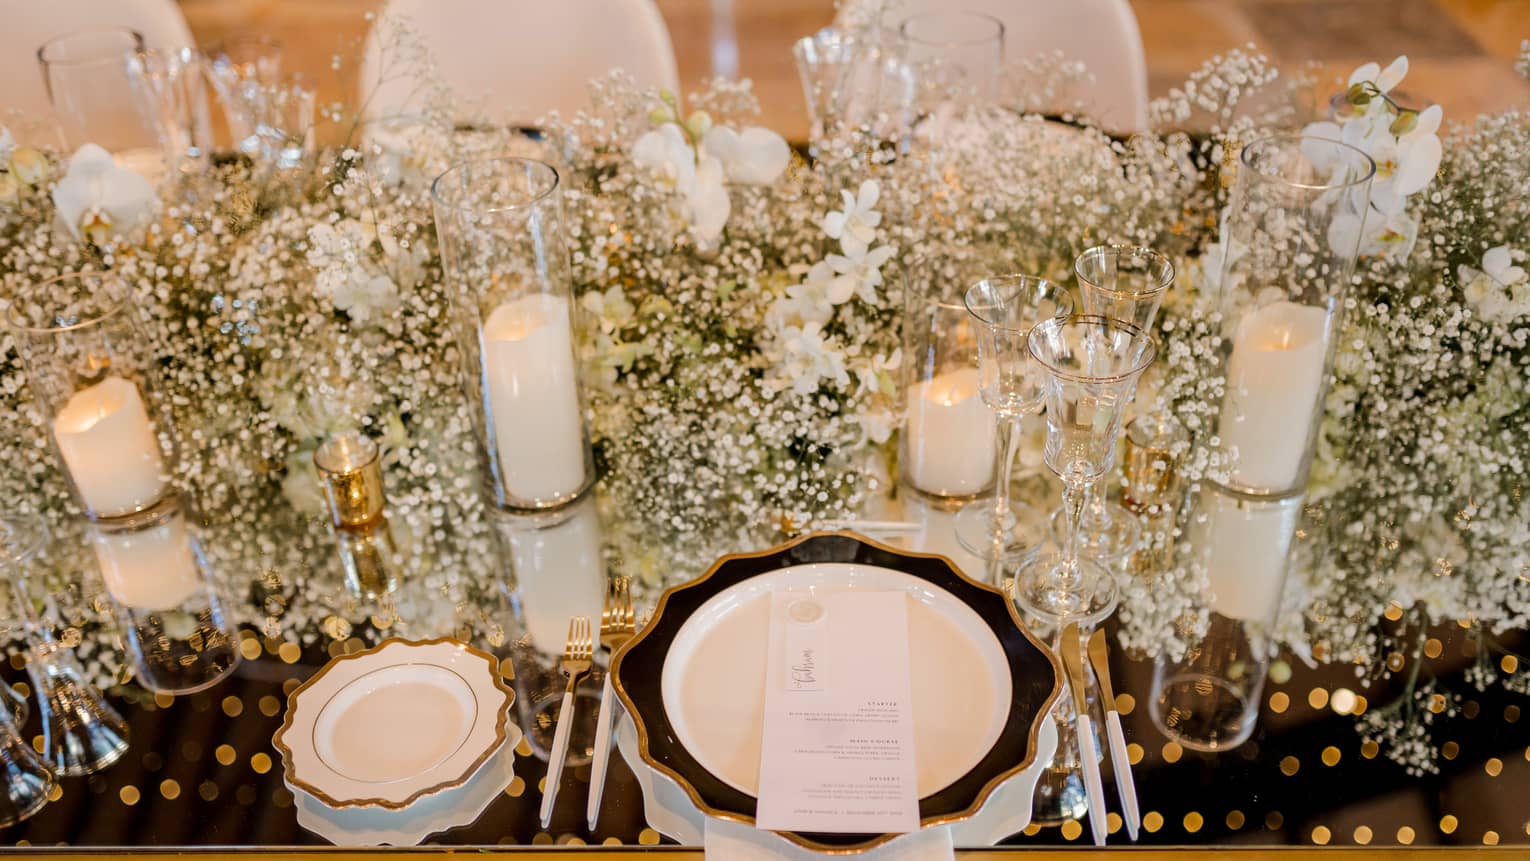 Closeup of table set for wedding reception with white flowers, candles, chair covers and dishes